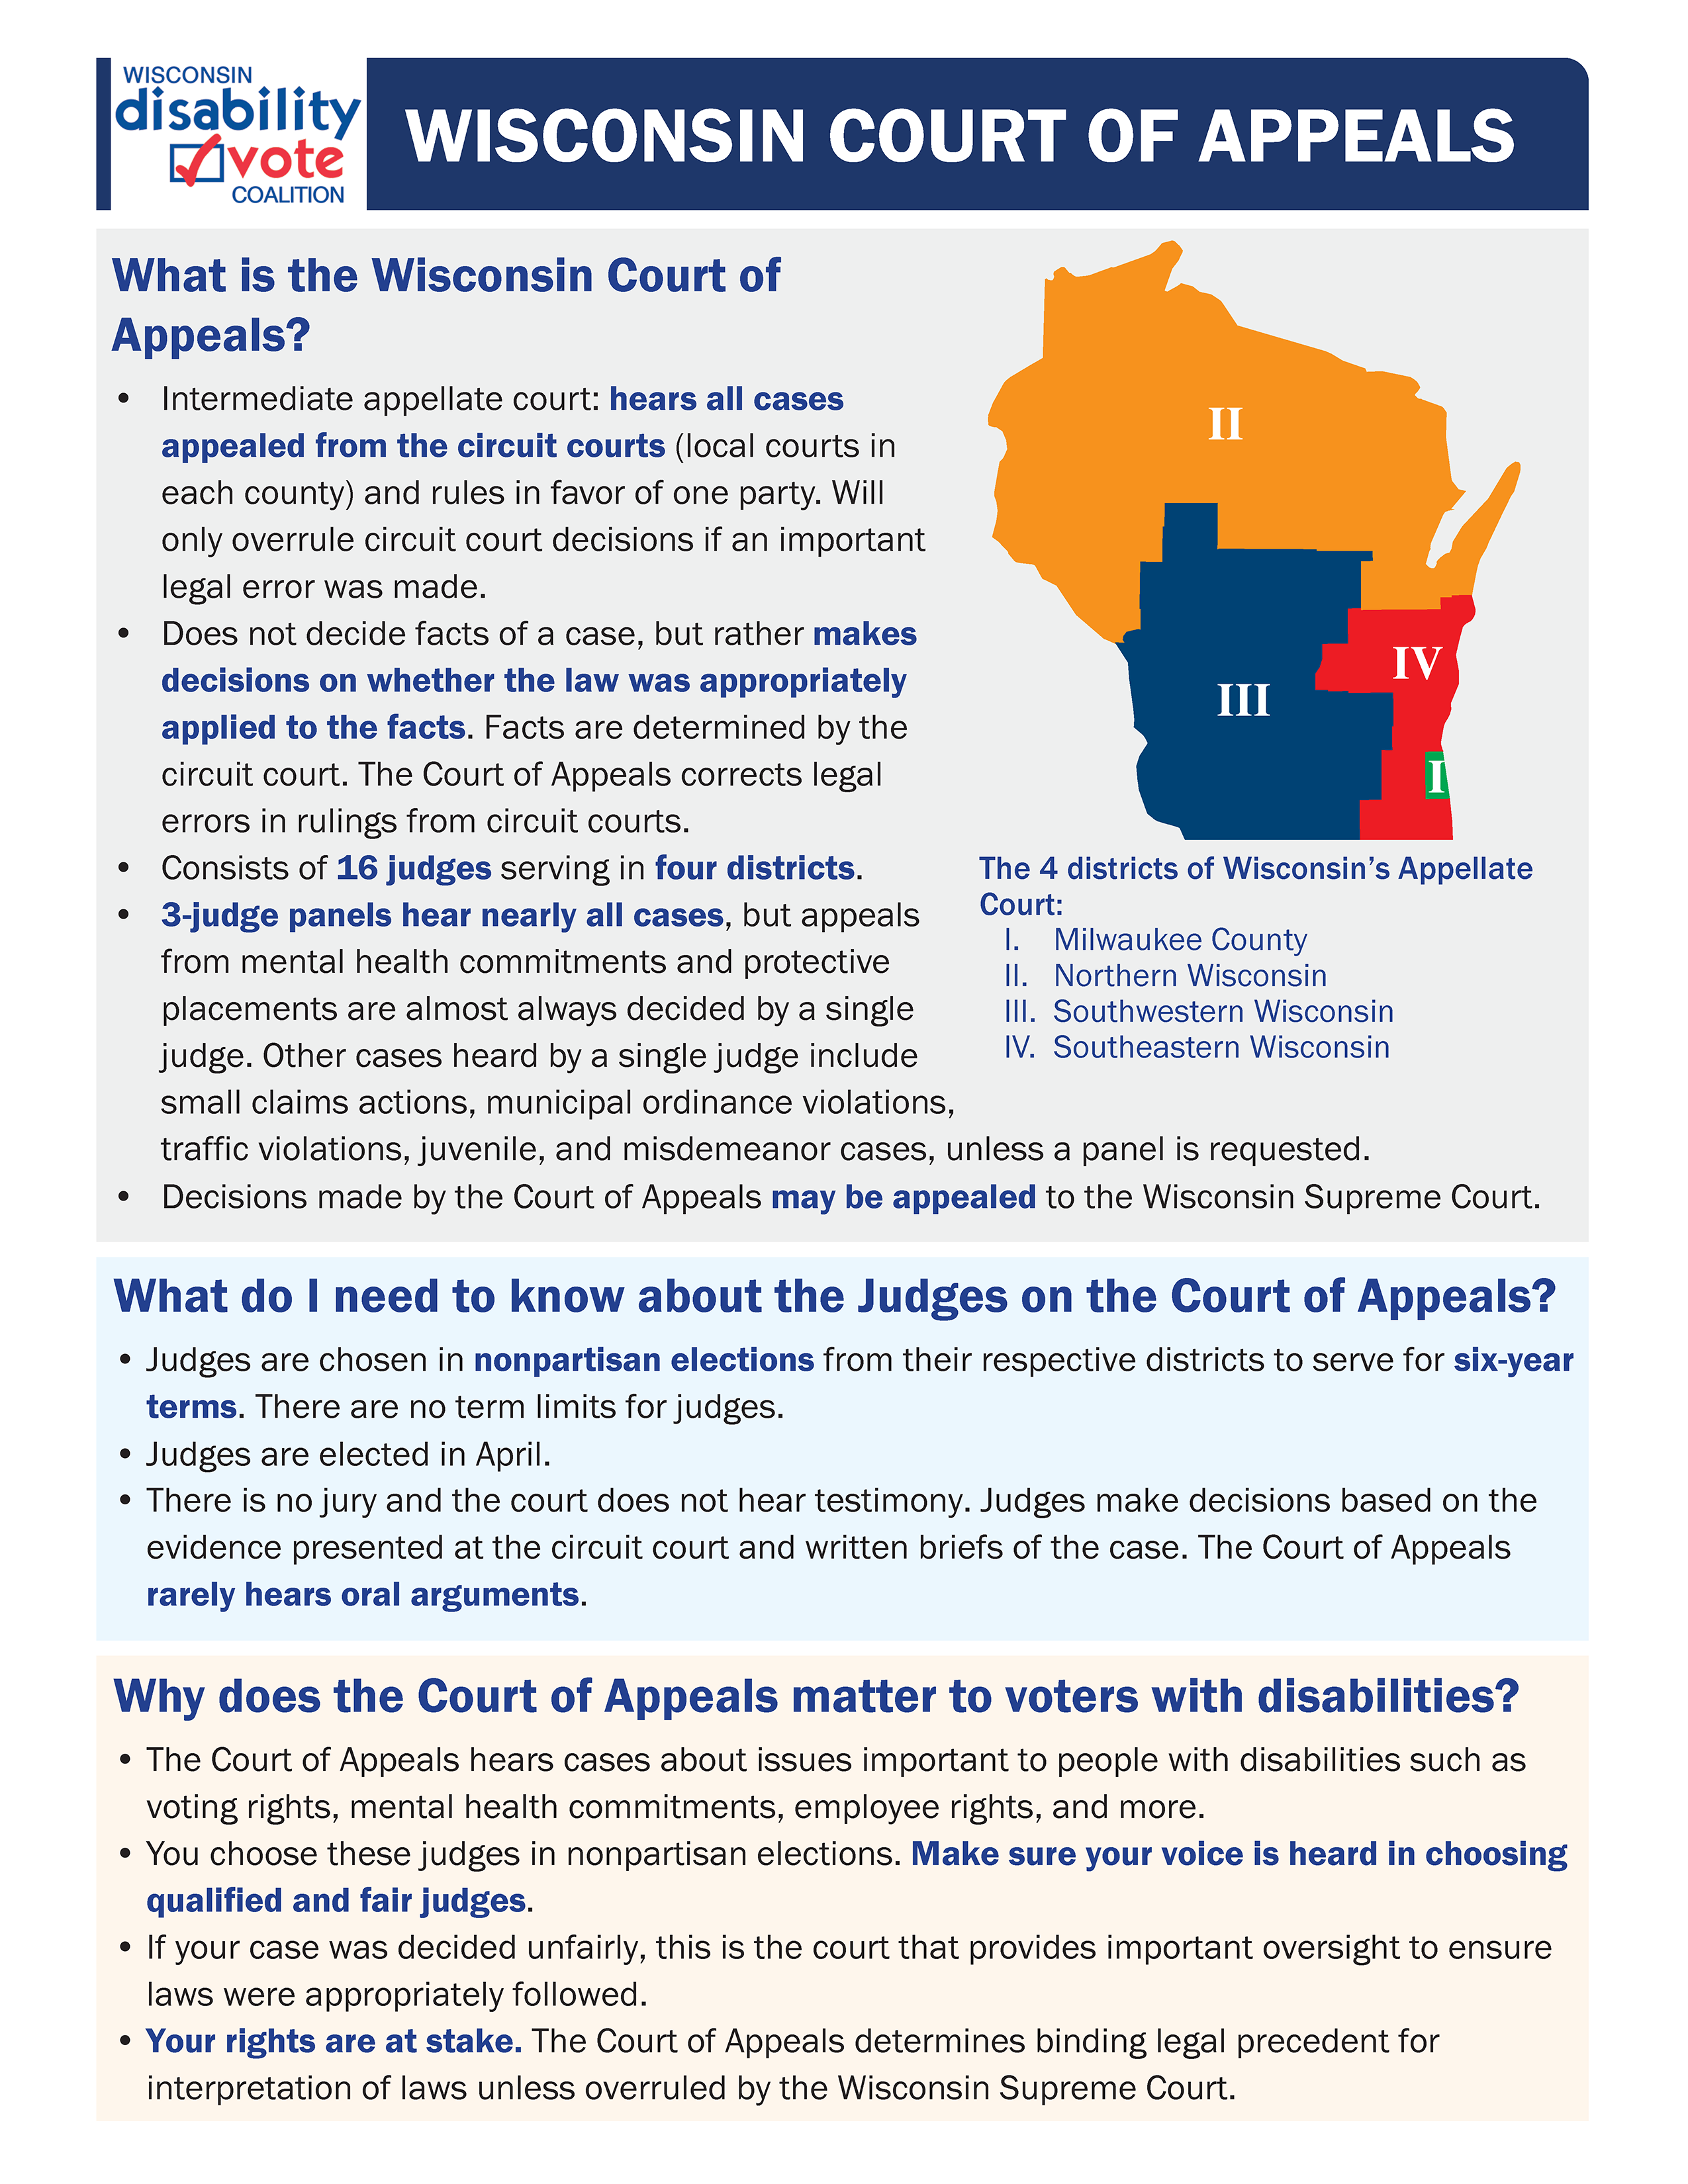 Court of Appeals Fact Sheet Wisconsin Disability Vote Coalition